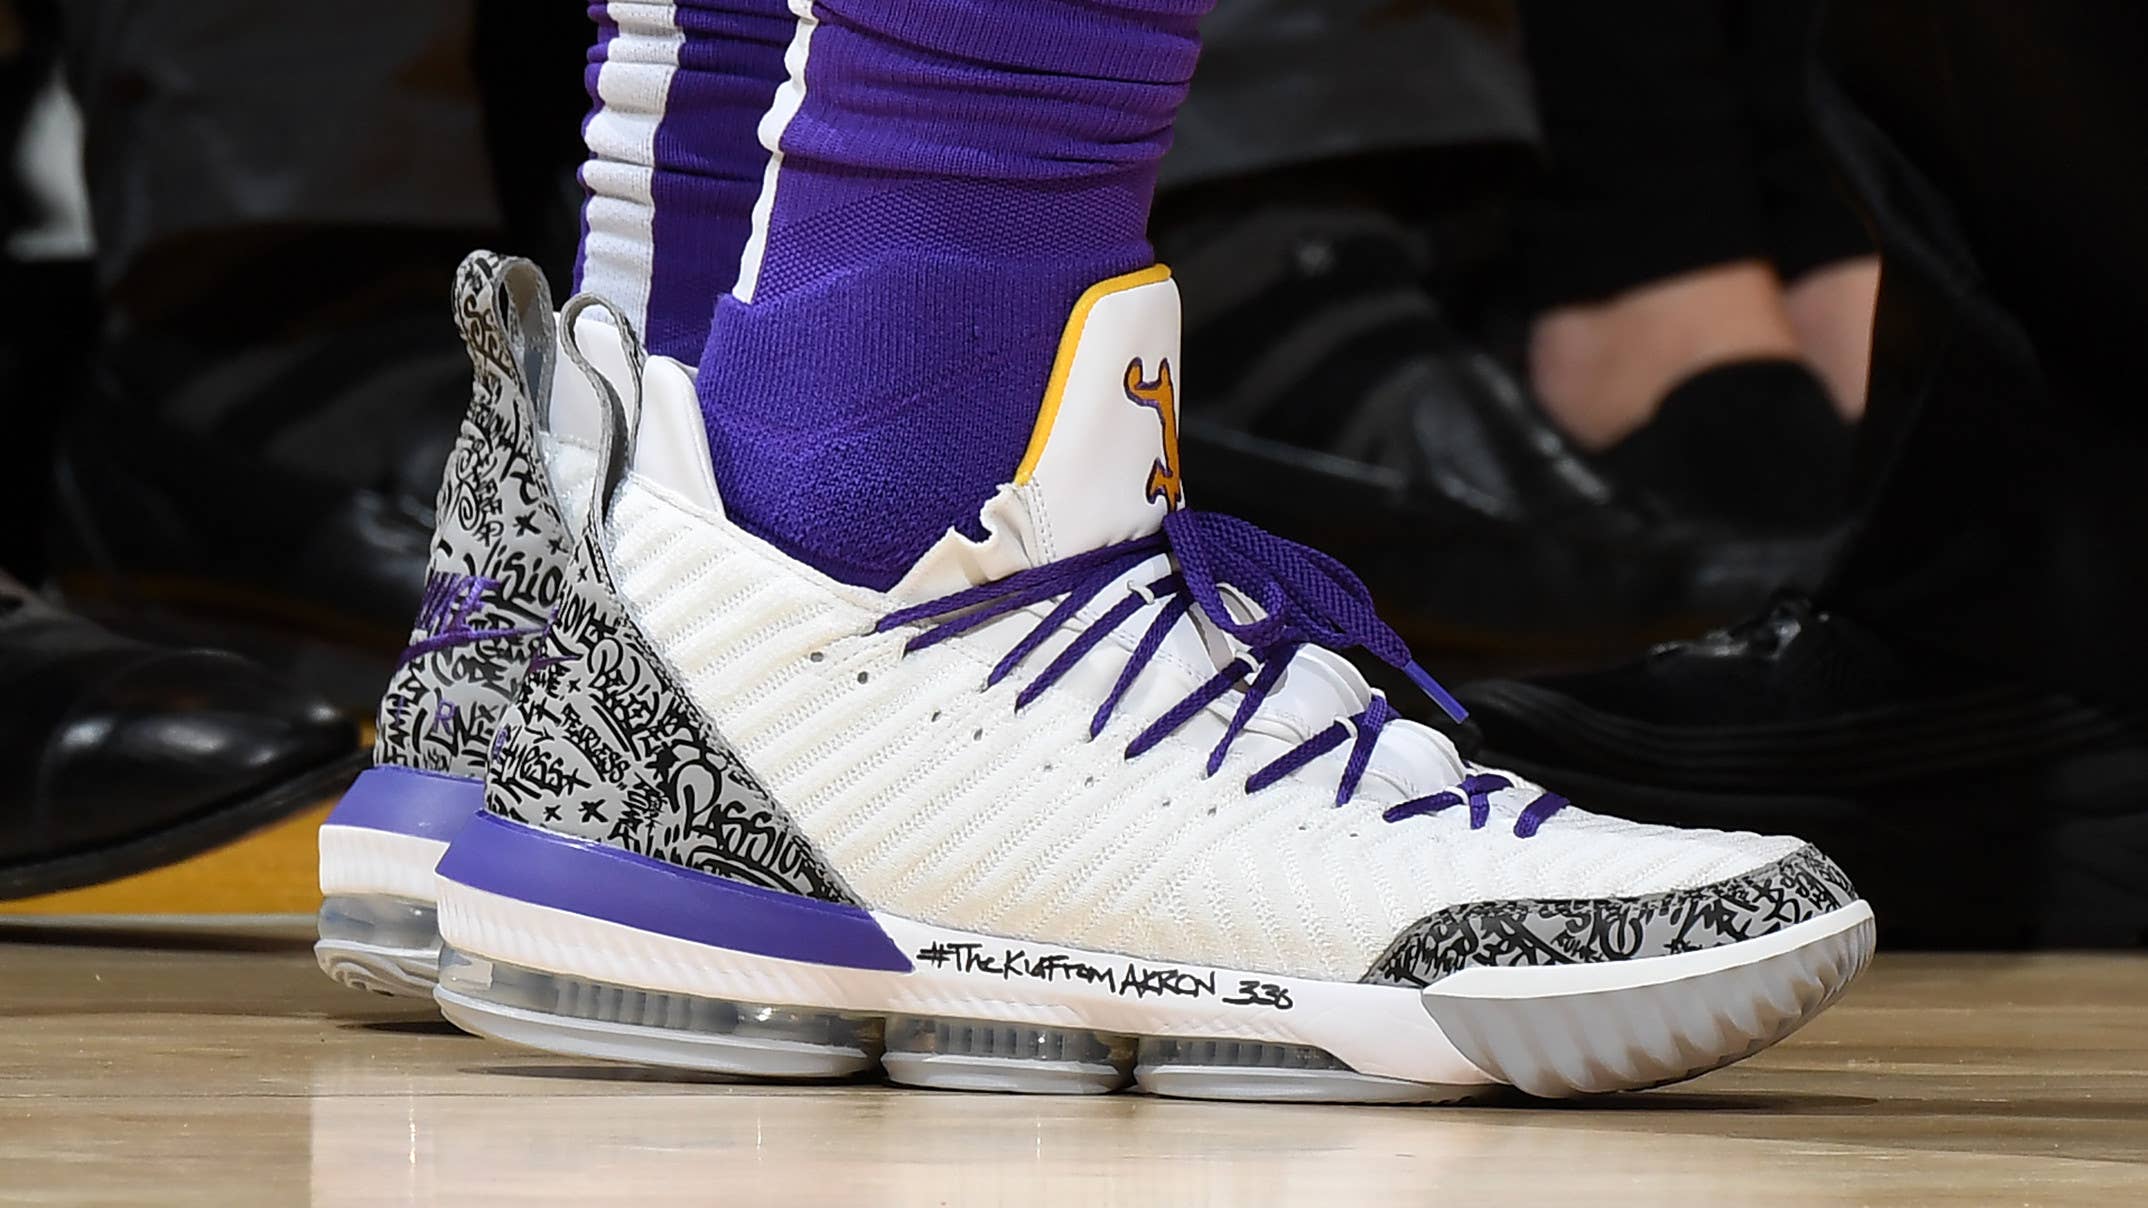 SoleWatch: LeBron James Makes History in Air Jordan 3-Inspired LeBron 16s |  Complex